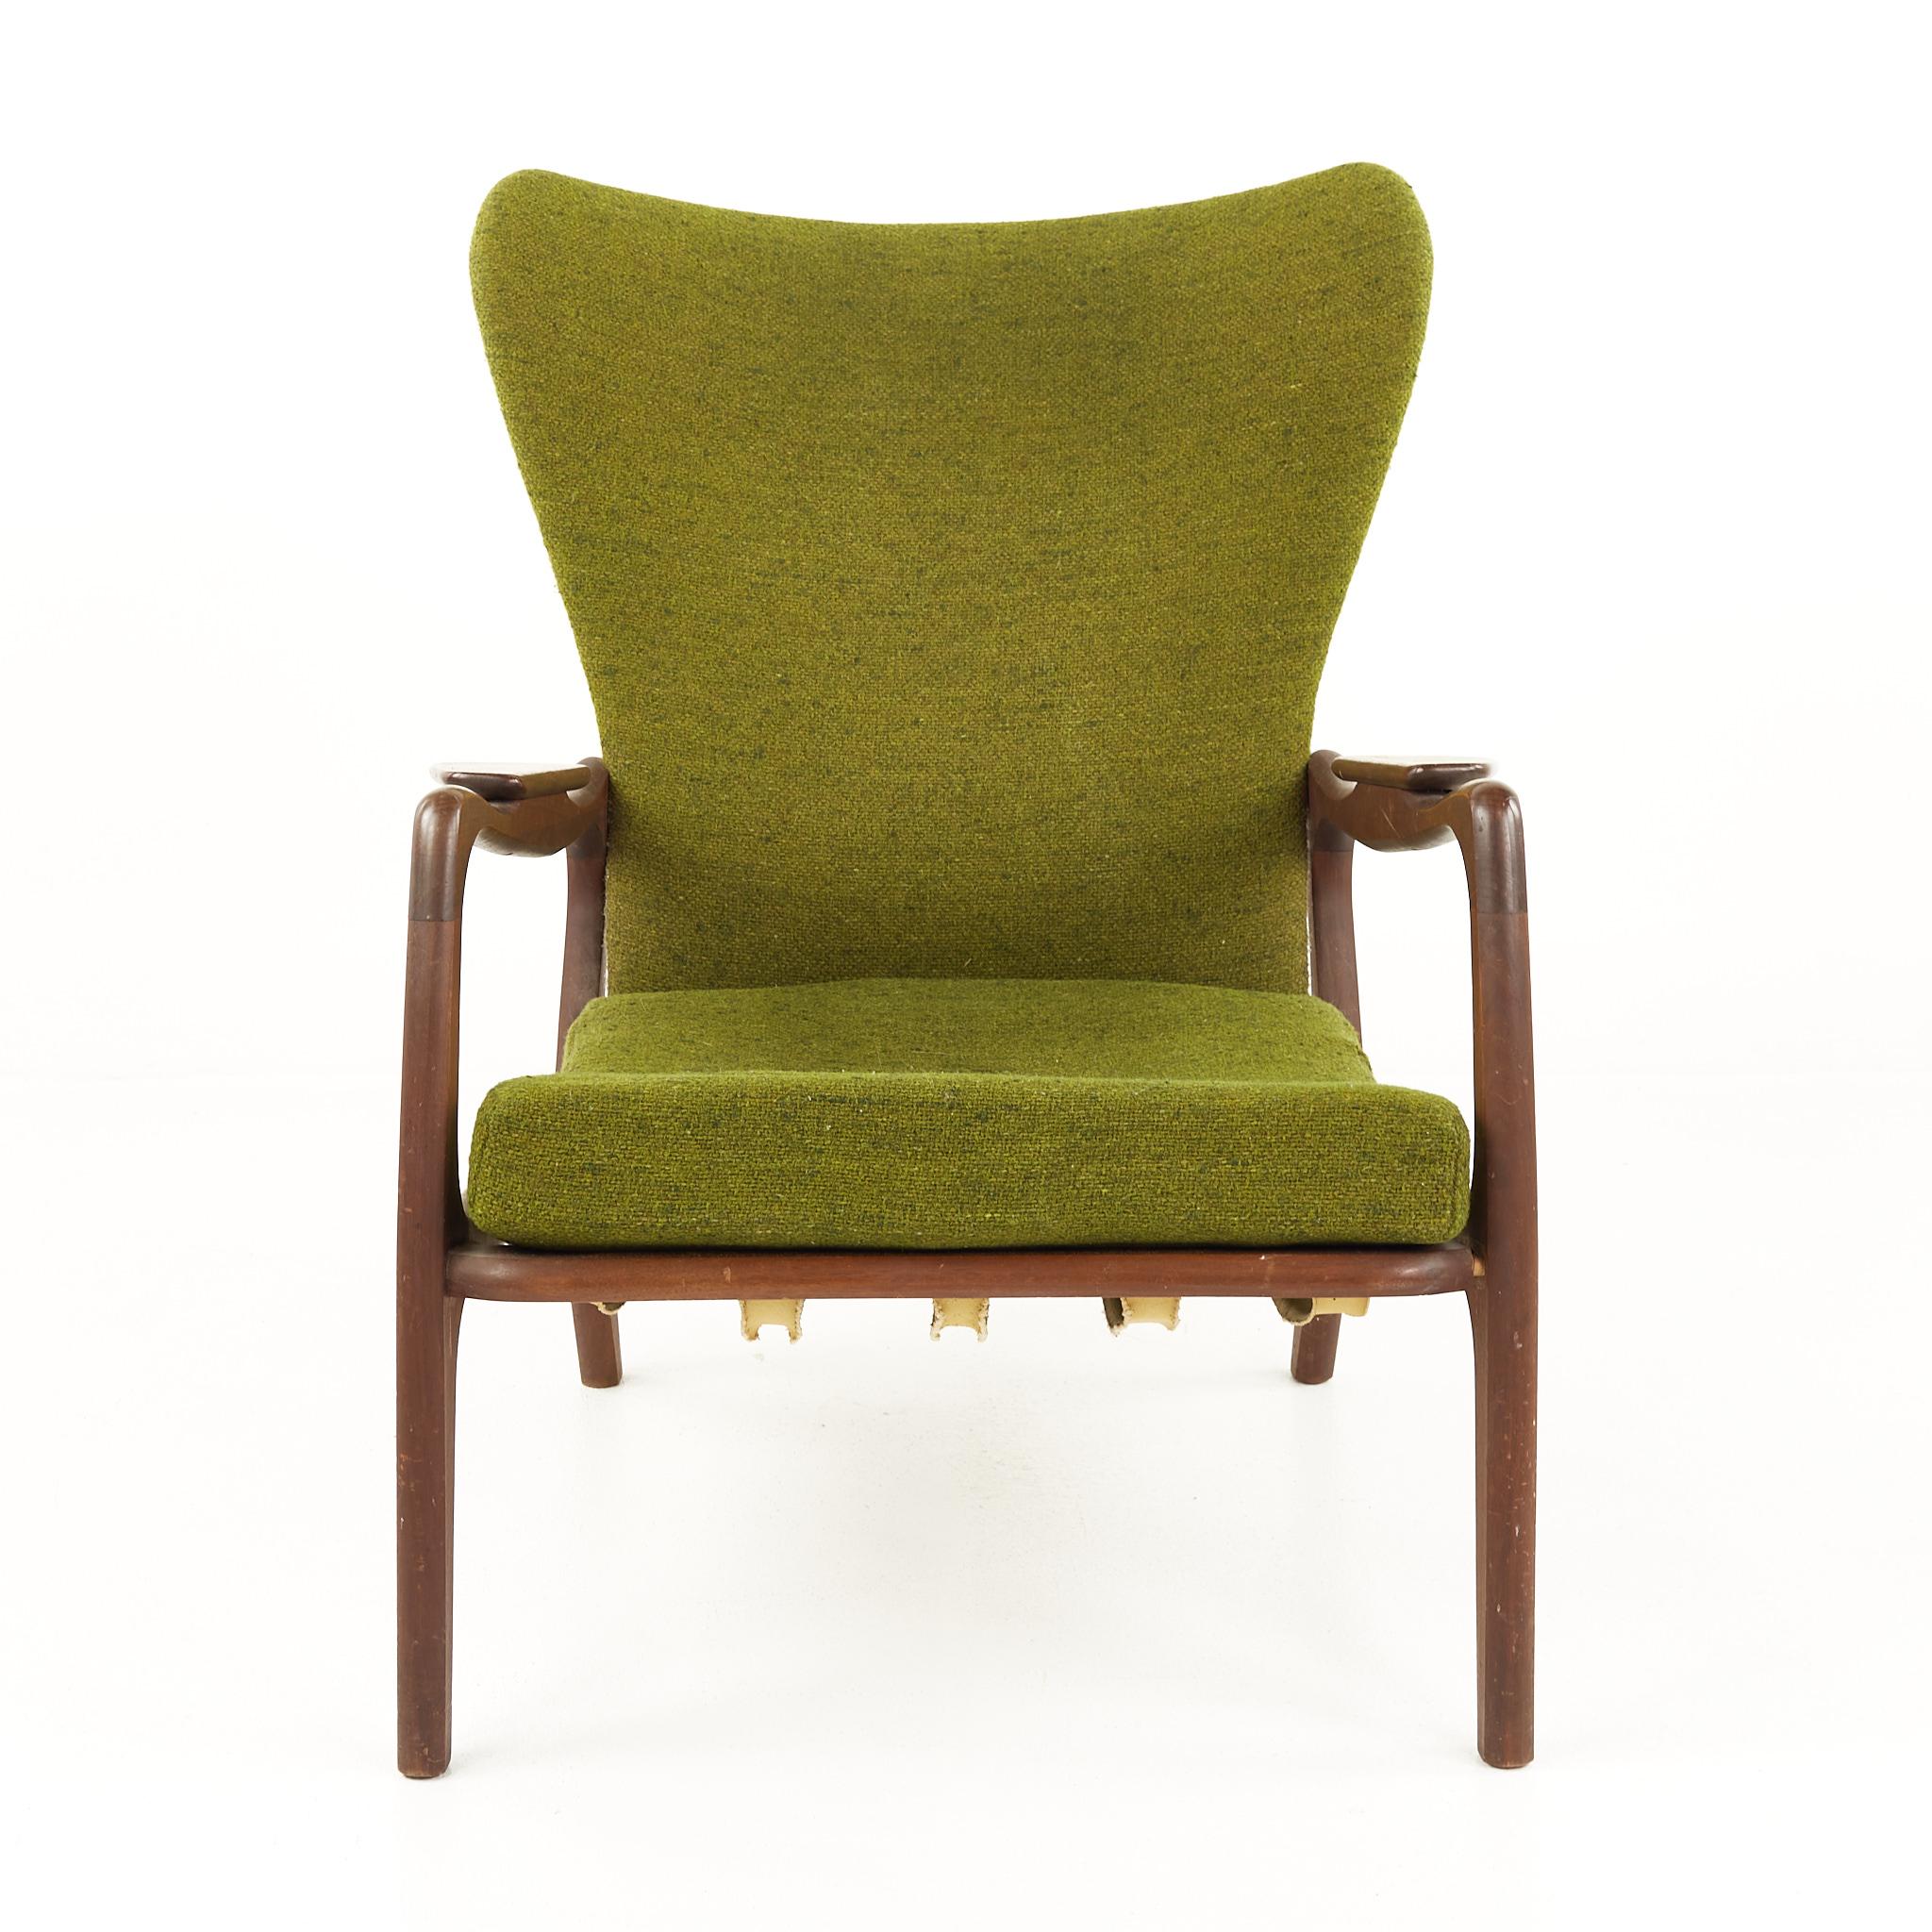 Adrian Pearsall mid century lounge chair

This chair measures: 28.75 wide x 33 deep x 37 inches high, with a seat height of 17 and arm height of 22.75 inches

All pieces of furniture can be had in what we call restored vintage condition. That